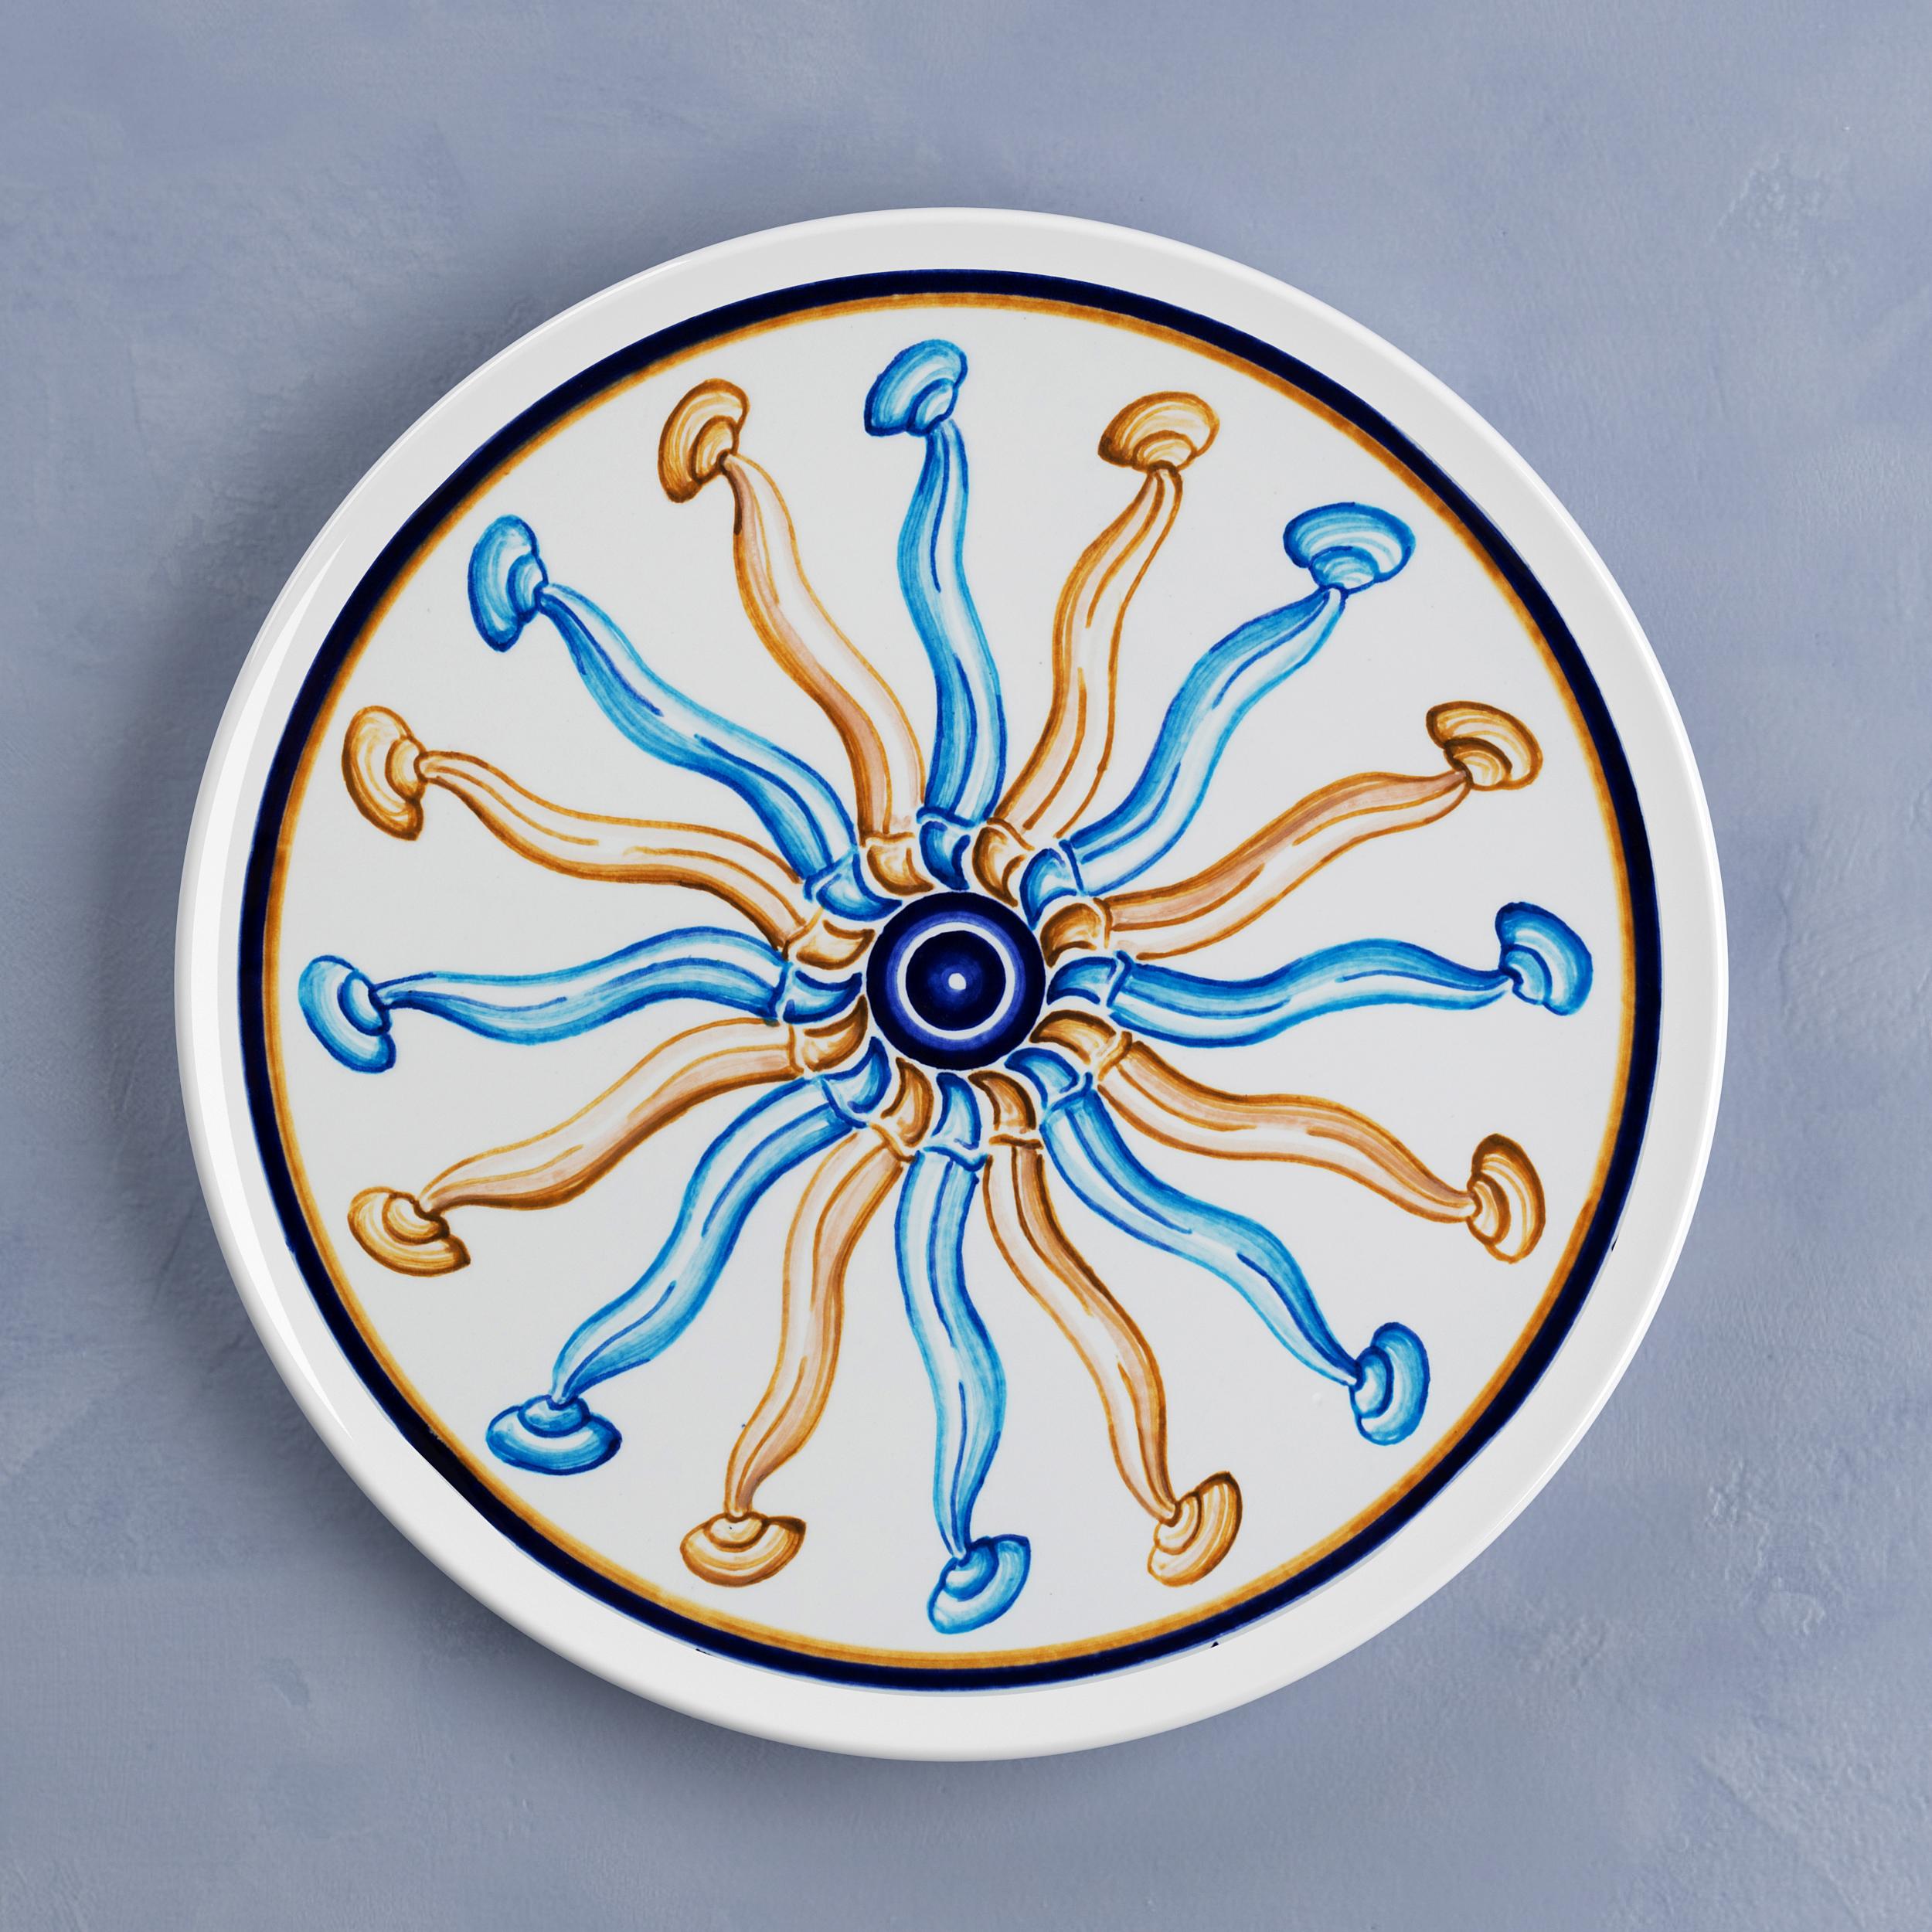 Beautiful handcrafted dinner plate by Crisodora will make an elegant statement with sophisticated Art de la table for every occasion.

Sicilian clay, hand painted.

Made in Sicily (Italy) by Master Artisans.